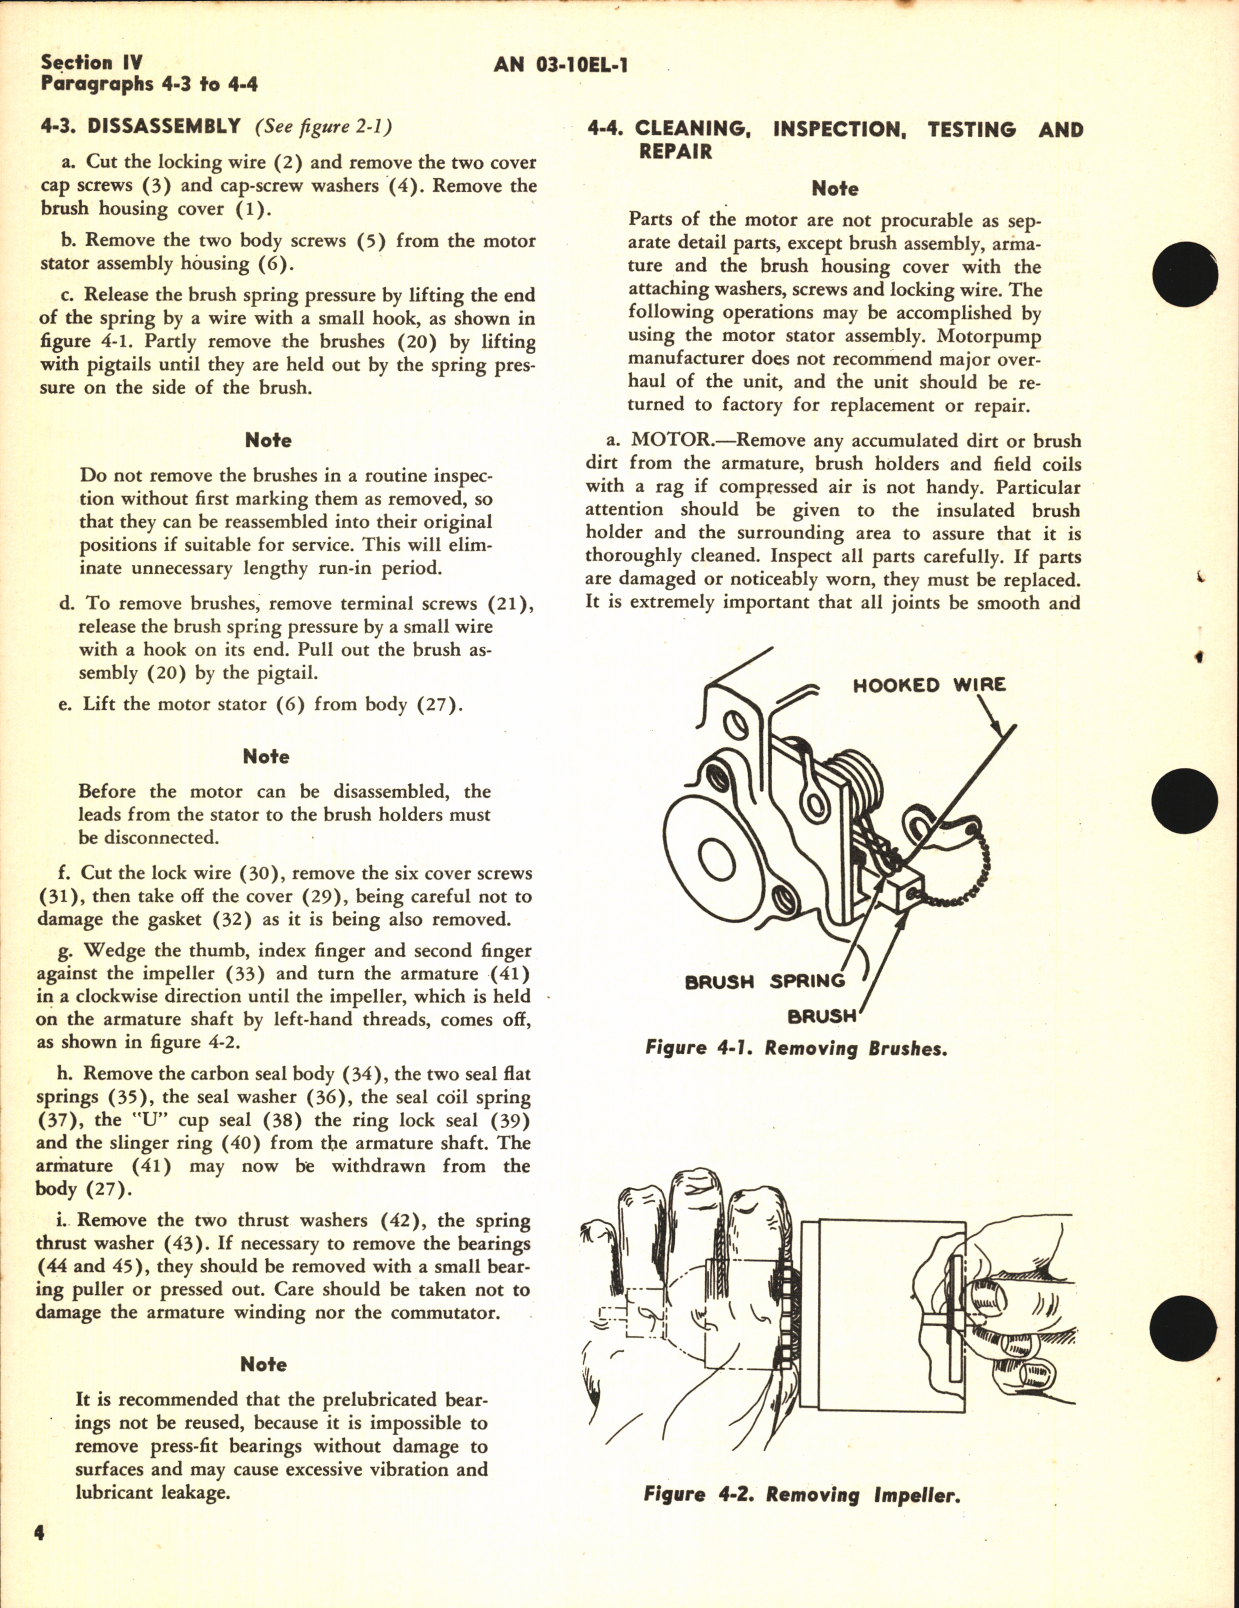 Sample page 8 from AirCorps Library document: Overhaul Instructions for Electric Fuel Pump Model AR3Y